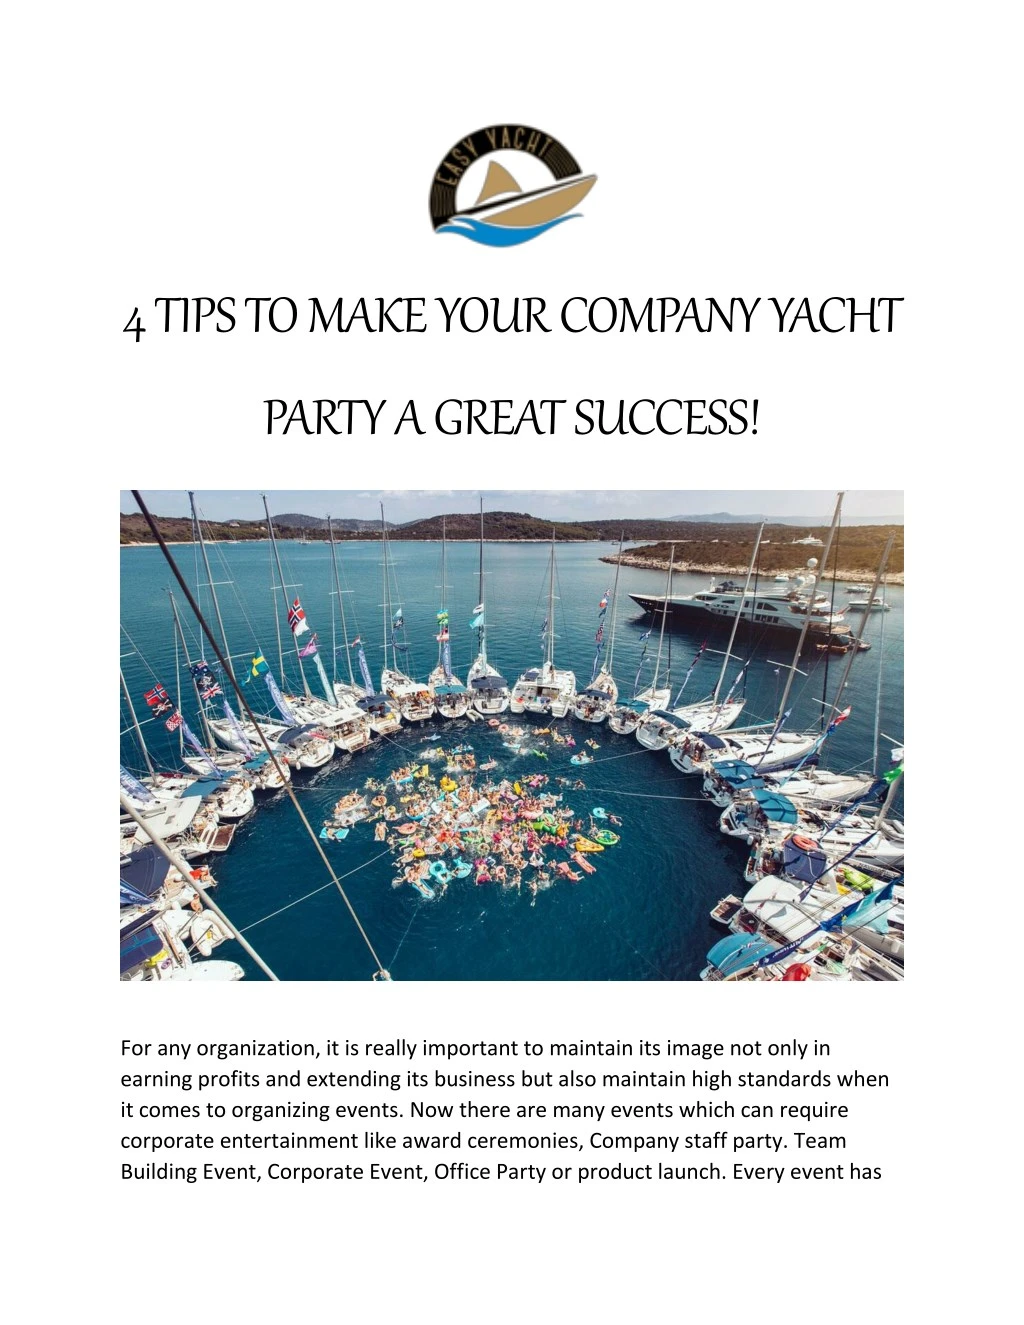 4 tips to make your company yacht